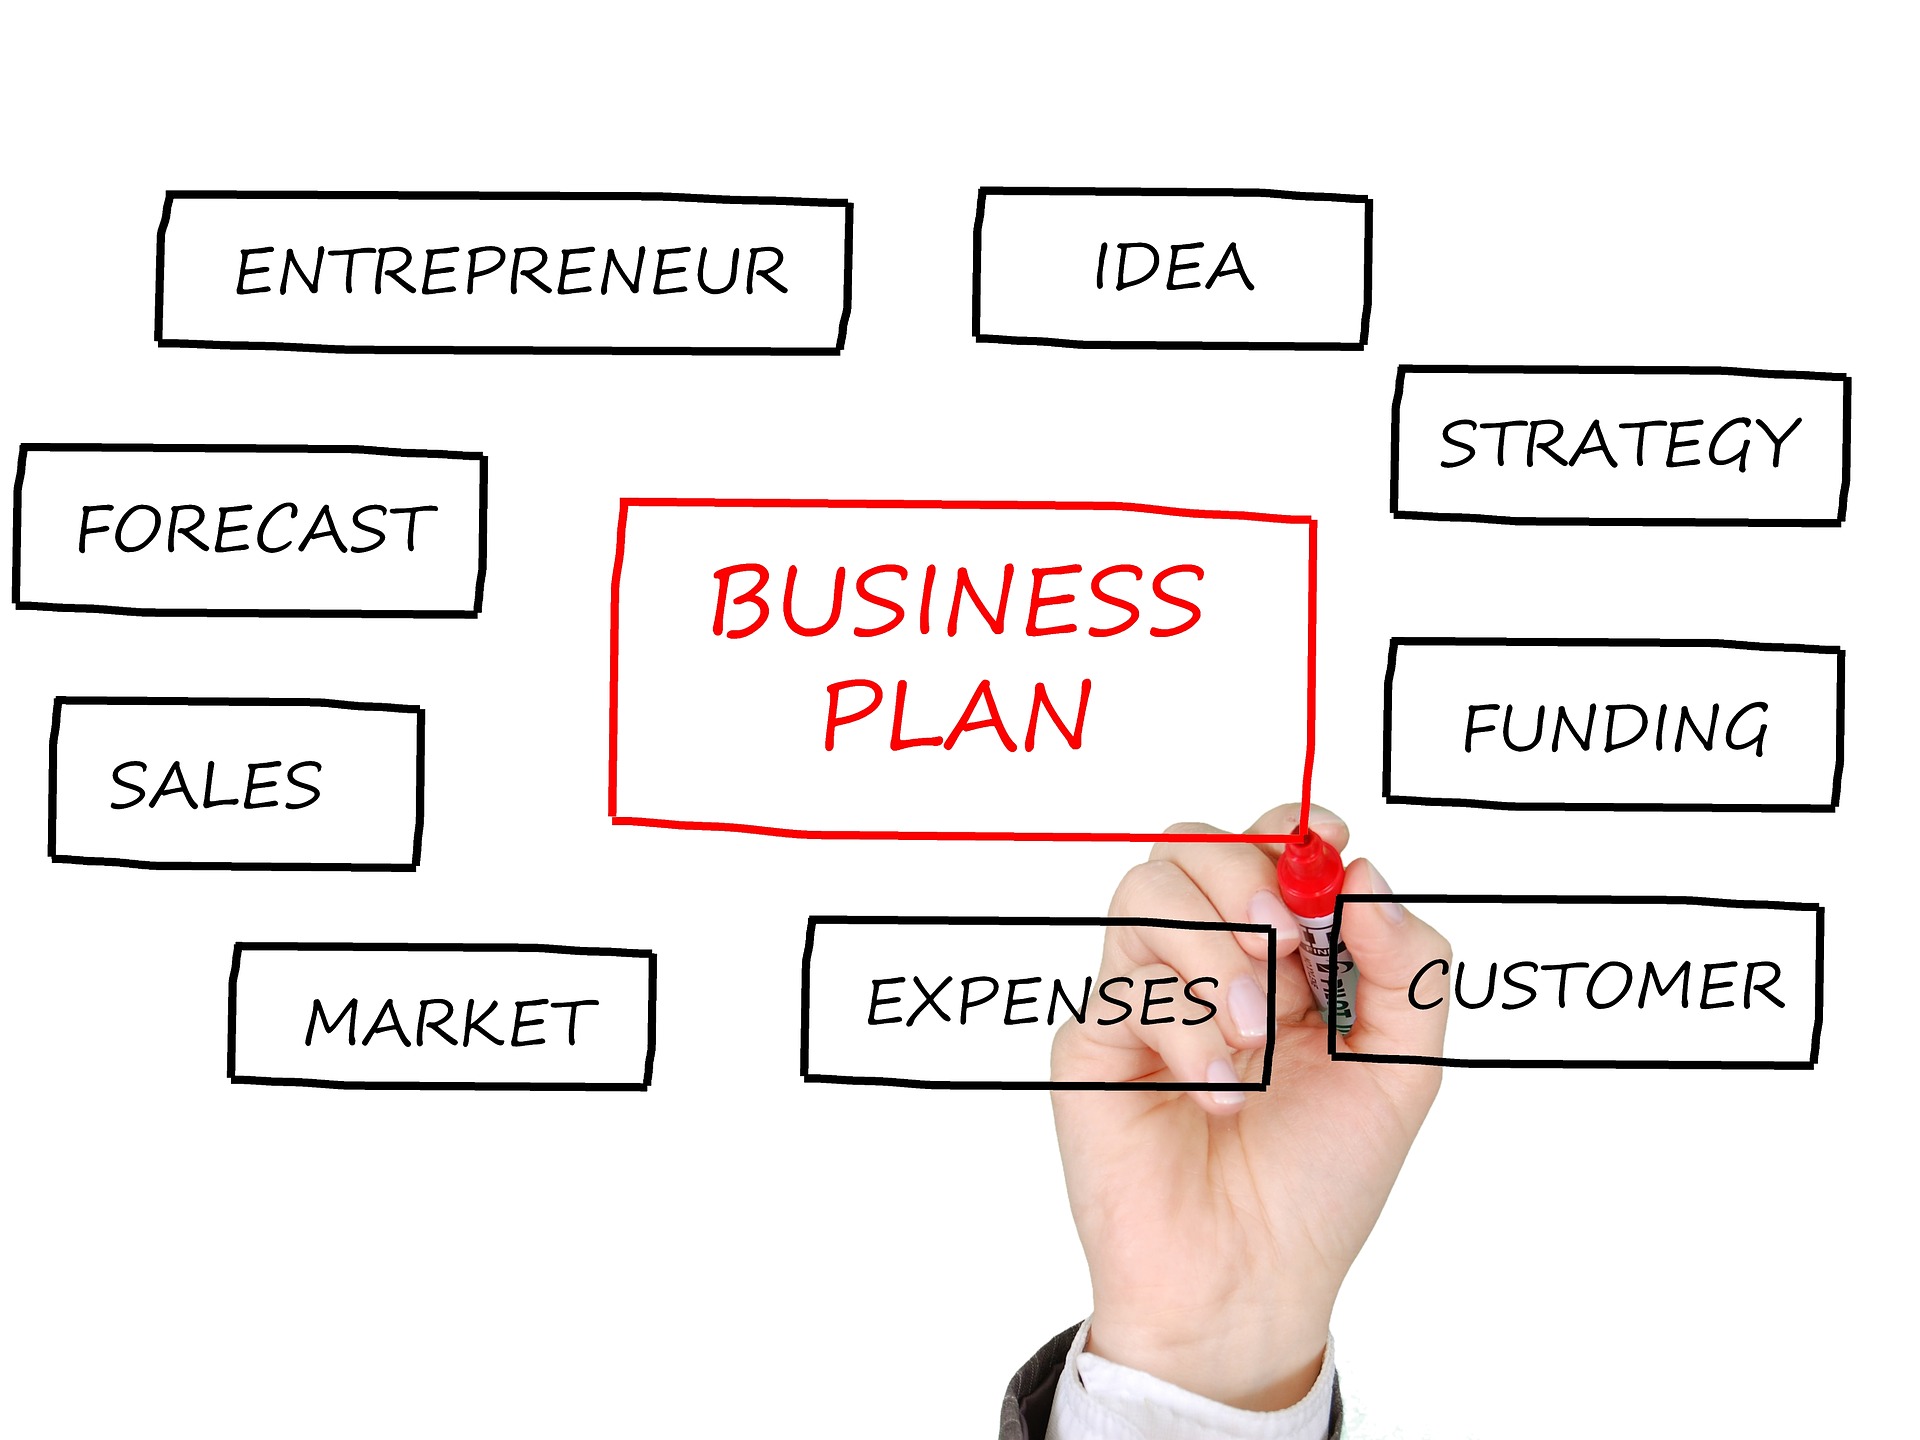 business planning plays a huge role in company development